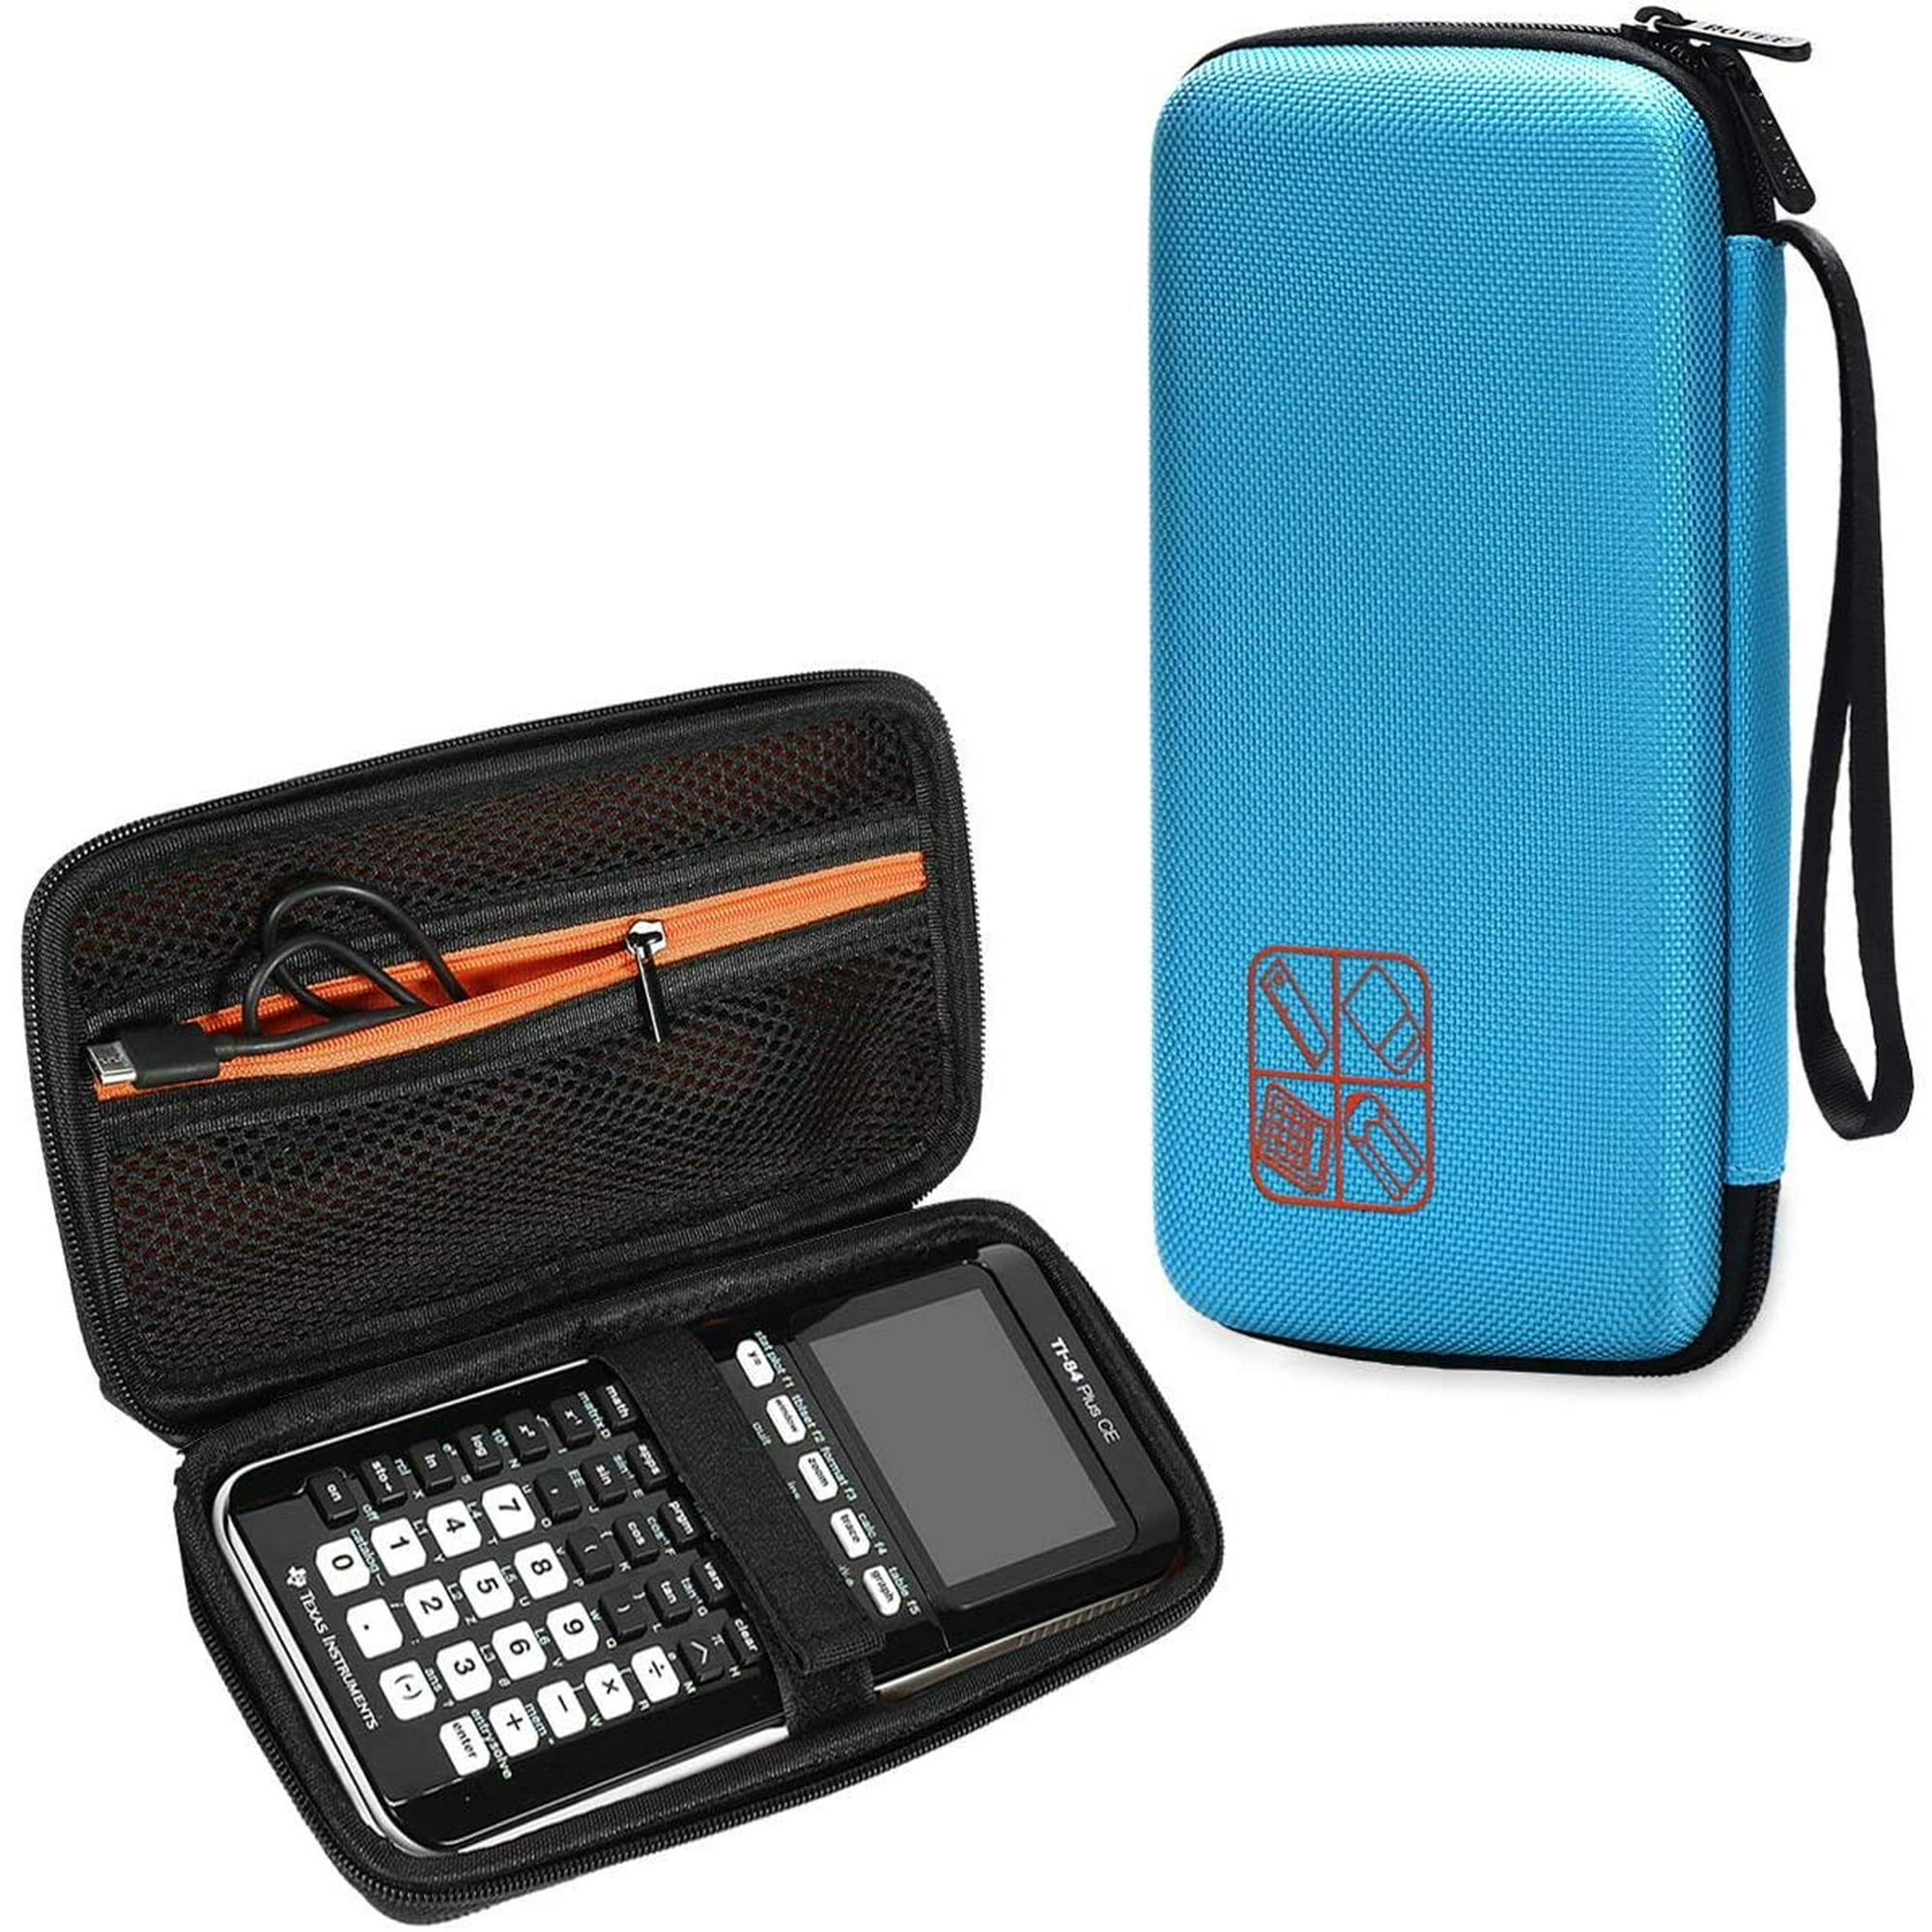 Plus CE Case only for Graphing Calculator Texas Instruments TI-84